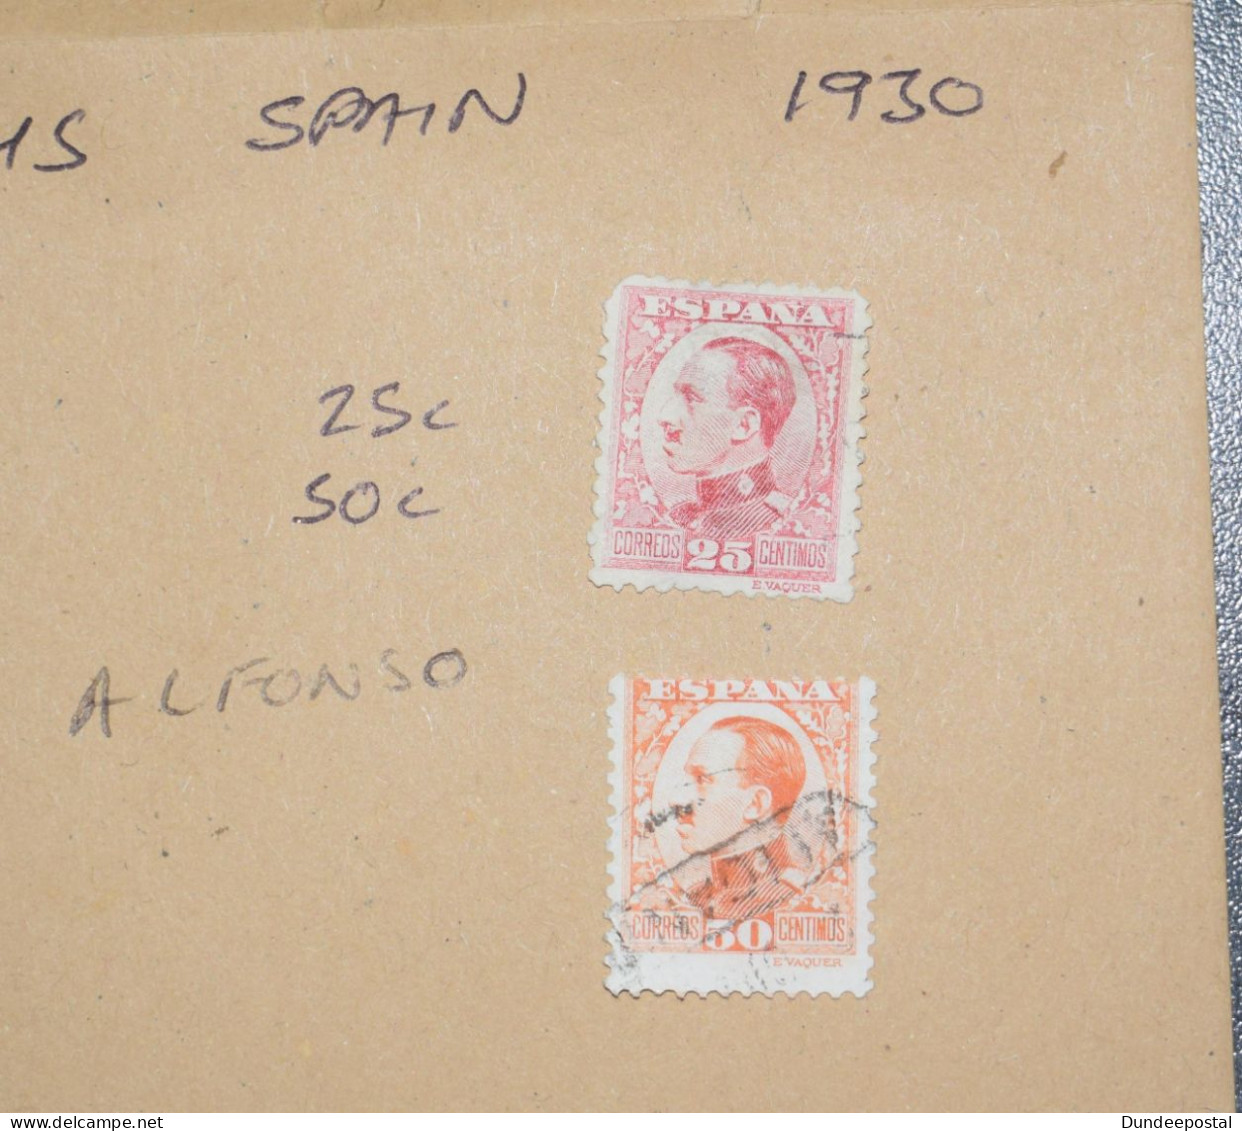 SPAIN  STAMPS  Alfonso 25c  50c  1930 ~~L@@K~~ - Used Stamps